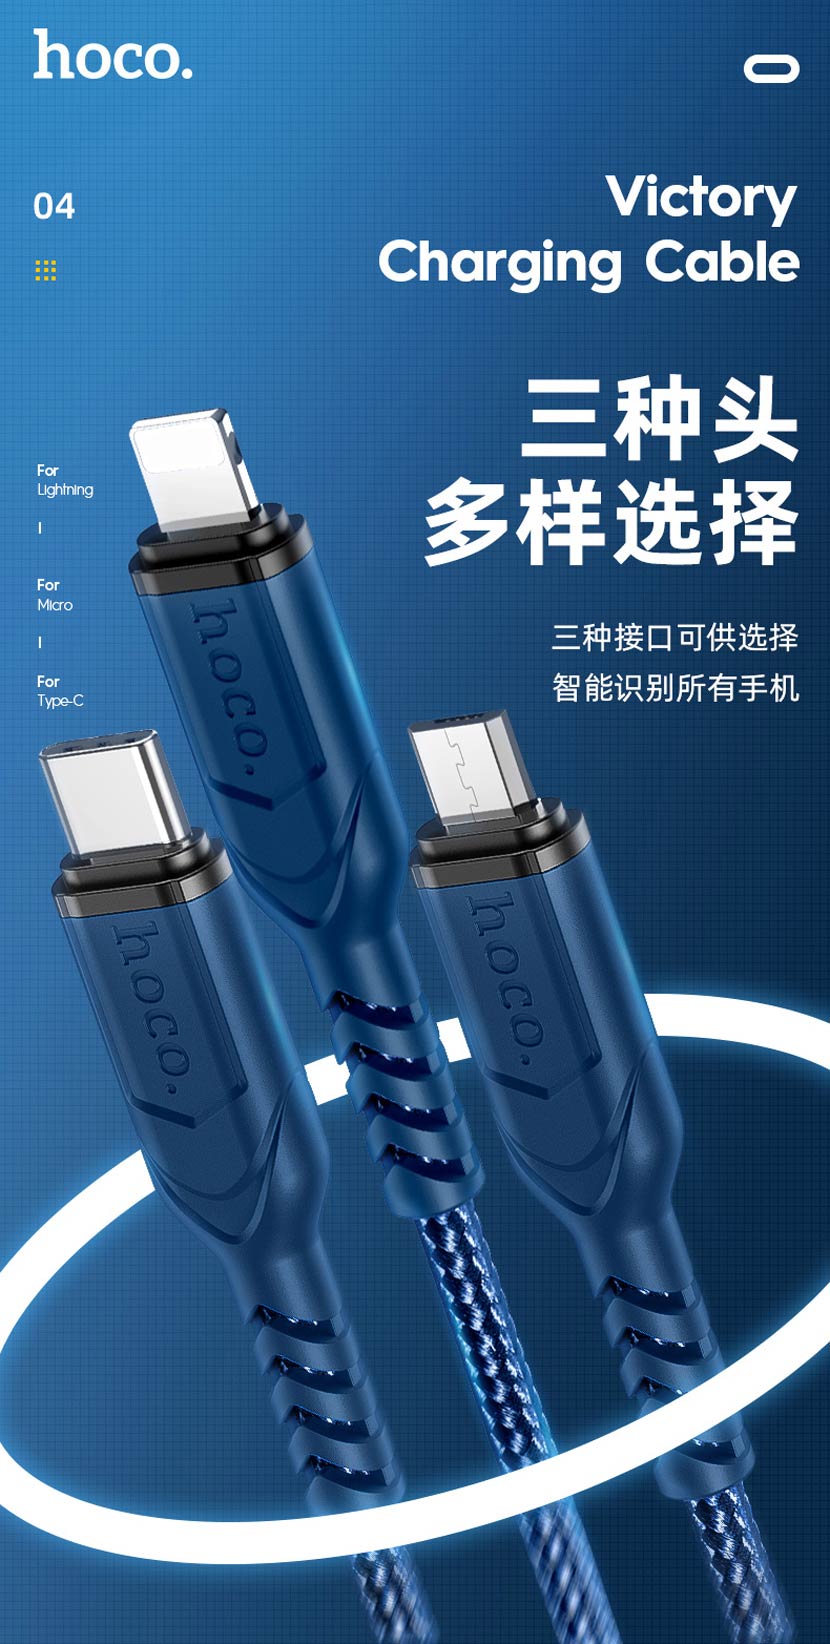 hoco news x59 victory charging data cable connectors cn